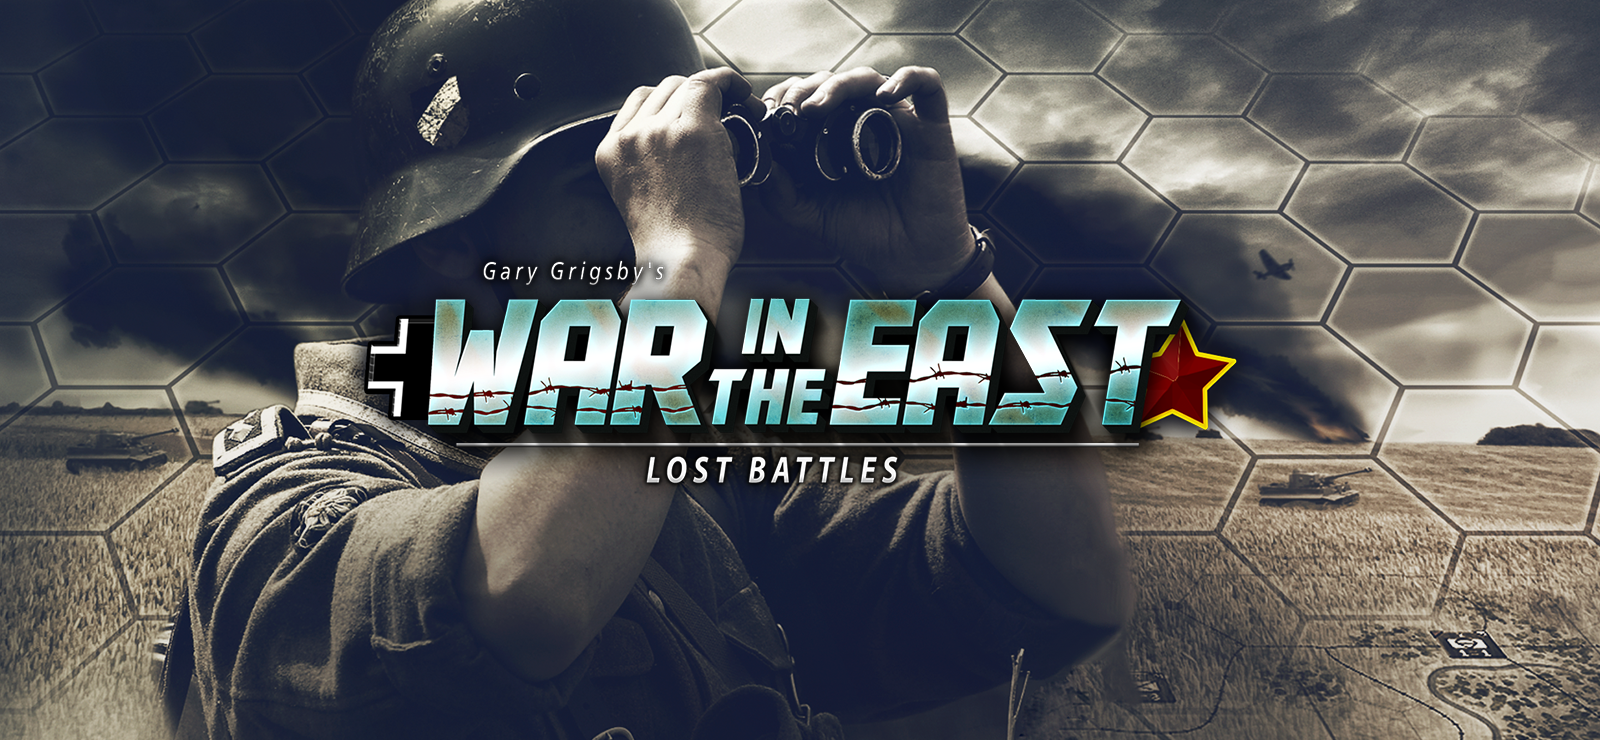 Gary Grigsby's War In The East: Lost Battles